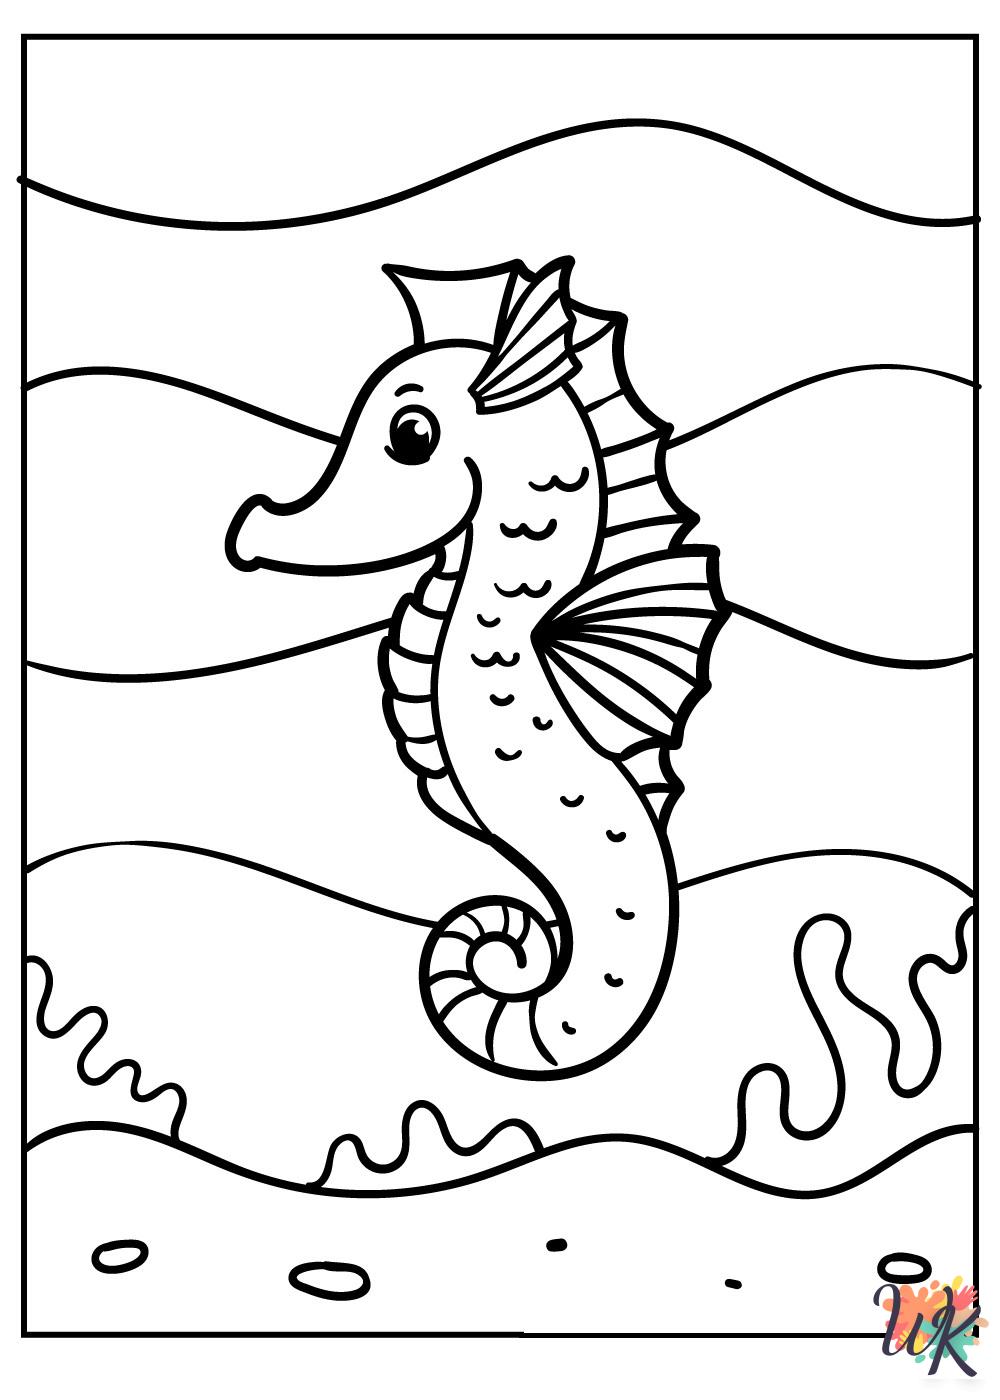 Under The Sea free coloring pages